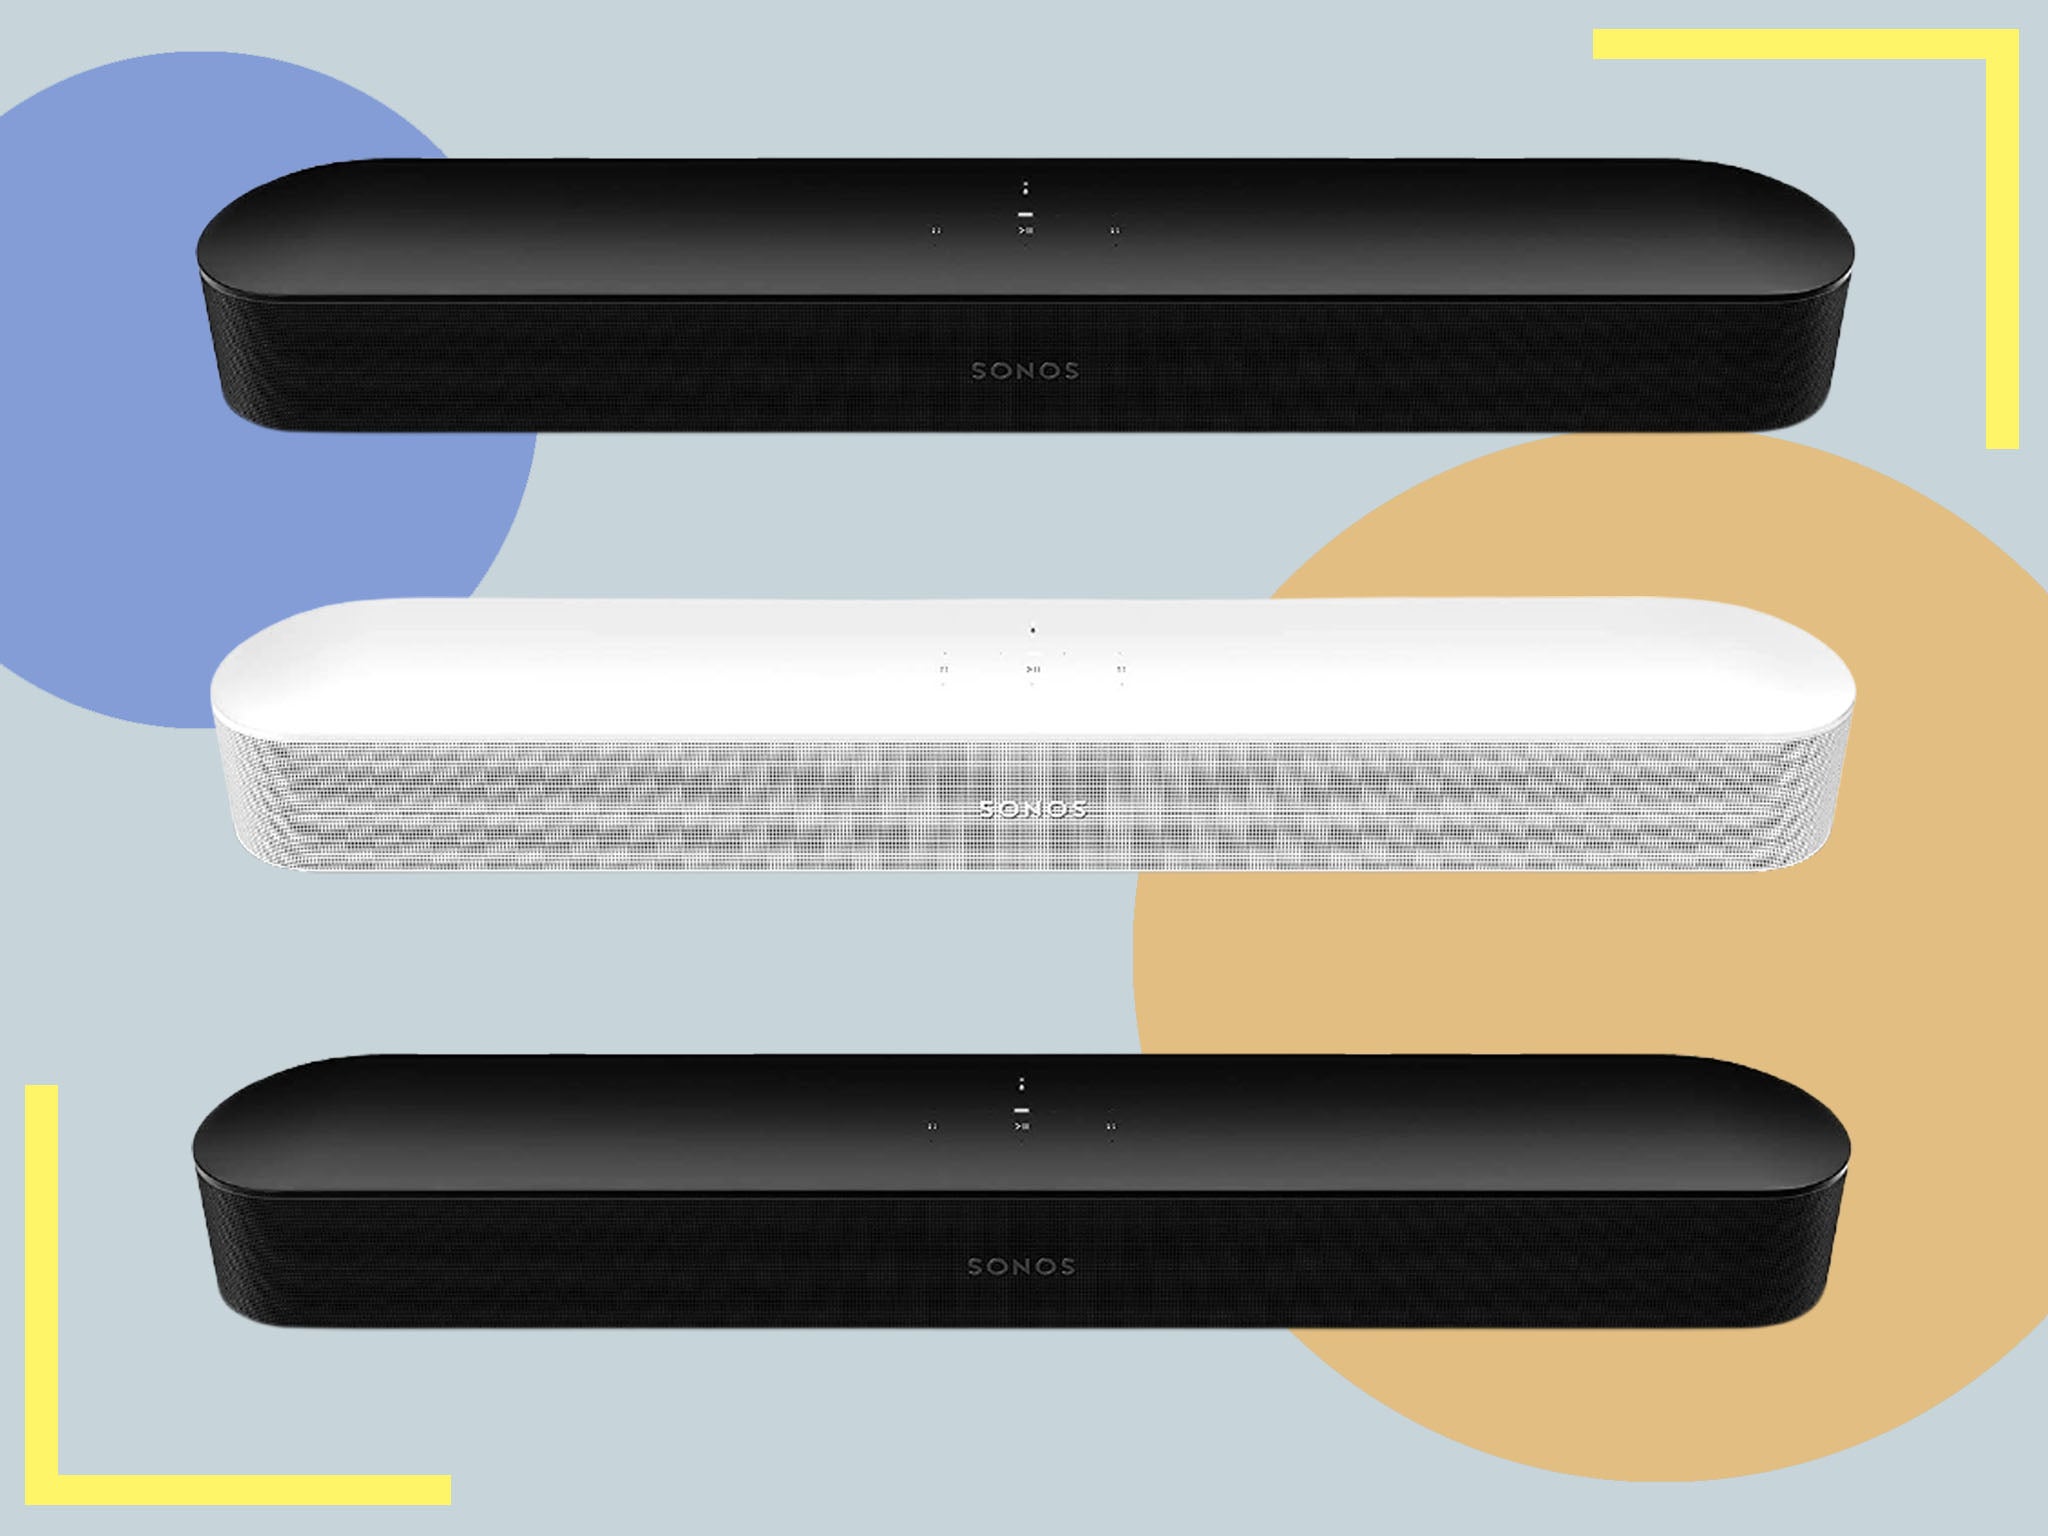 beam 2 soundbar review: A update elevates the best compact model to new heights | The